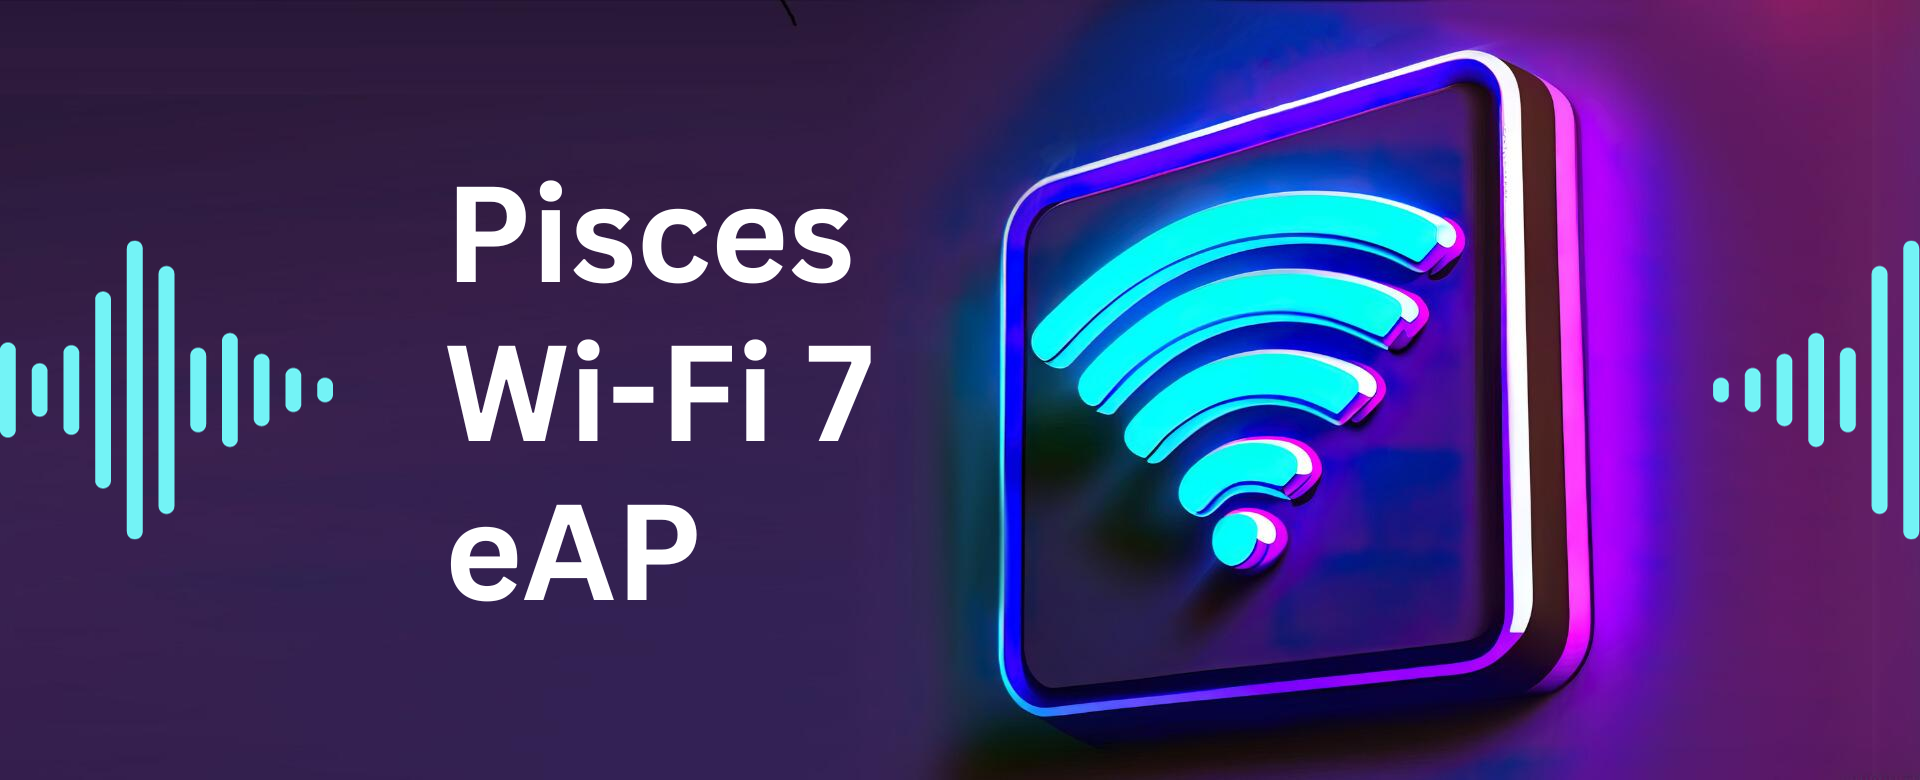 Embracing Wi-Fi 7: USI Launches Pisces Enterprise Access-Point to Support Enterprises with The Challenges of High-Density Data